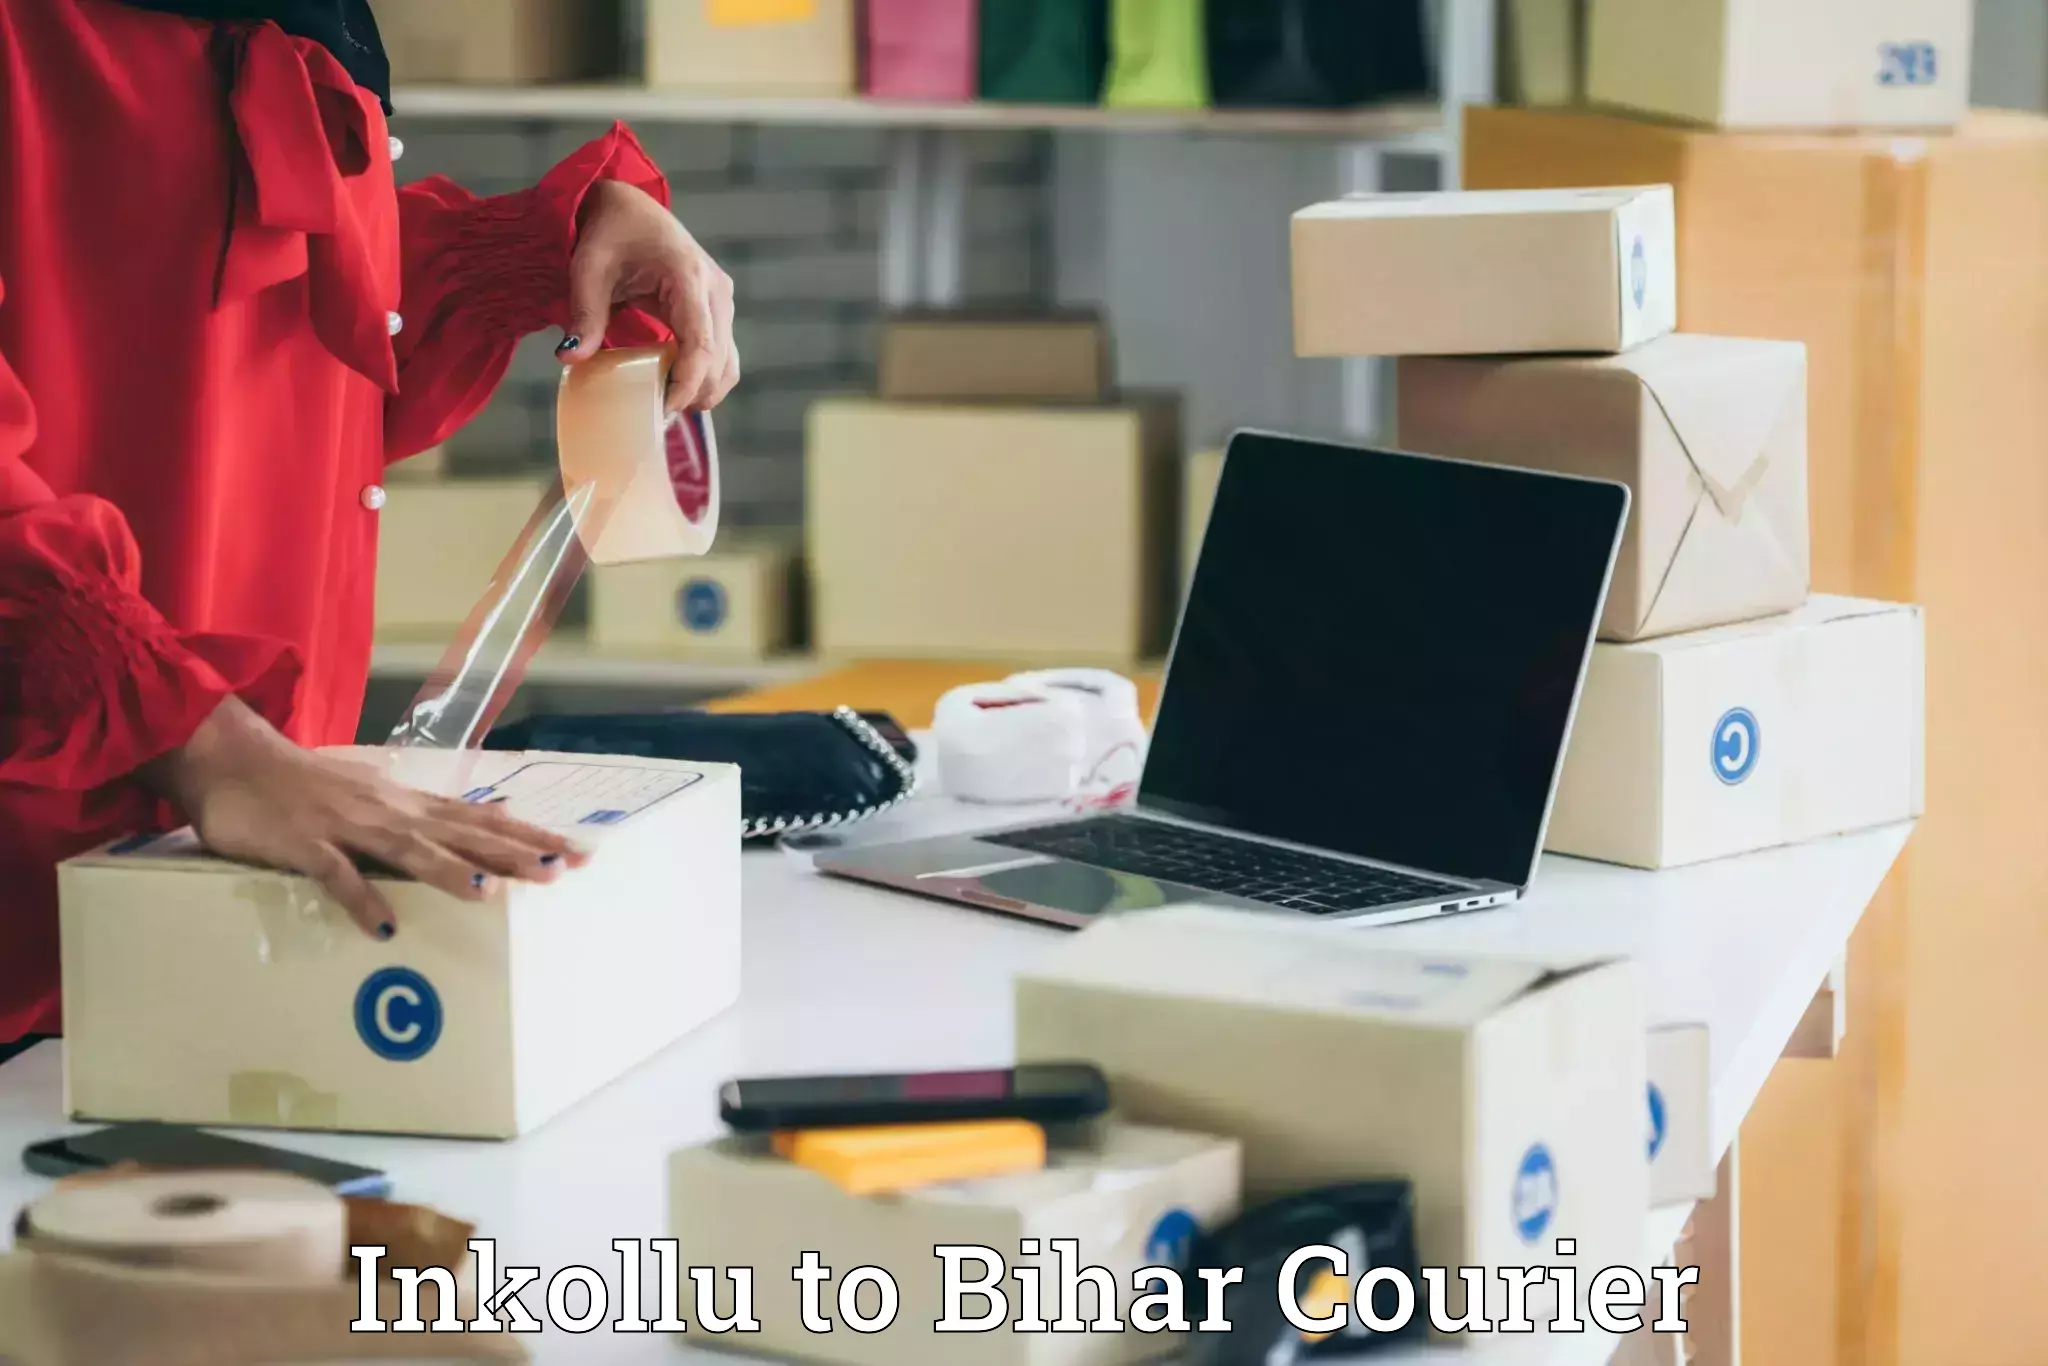 State-of-the-art courier technology Inkollu to Saharsa